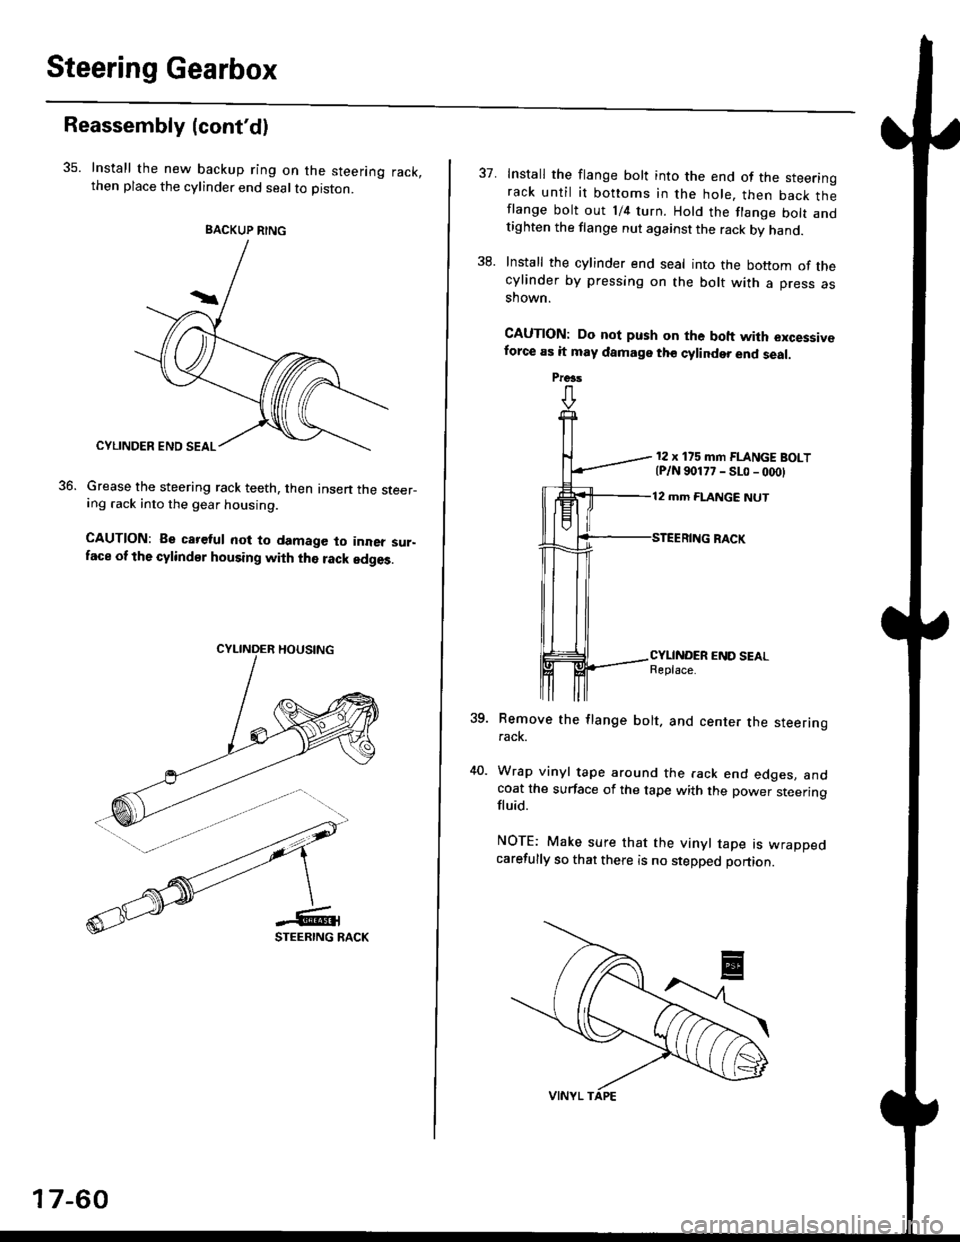 HONDA CIVIC 1996 6.G Owners Manual Steering Gearbox
Reassembly {contd)
35. Install the new backup ring on the steering rack,then place the cylinder end seal to piston.
Grease the steering rack teeth, then Insen the steer-ing .ack into